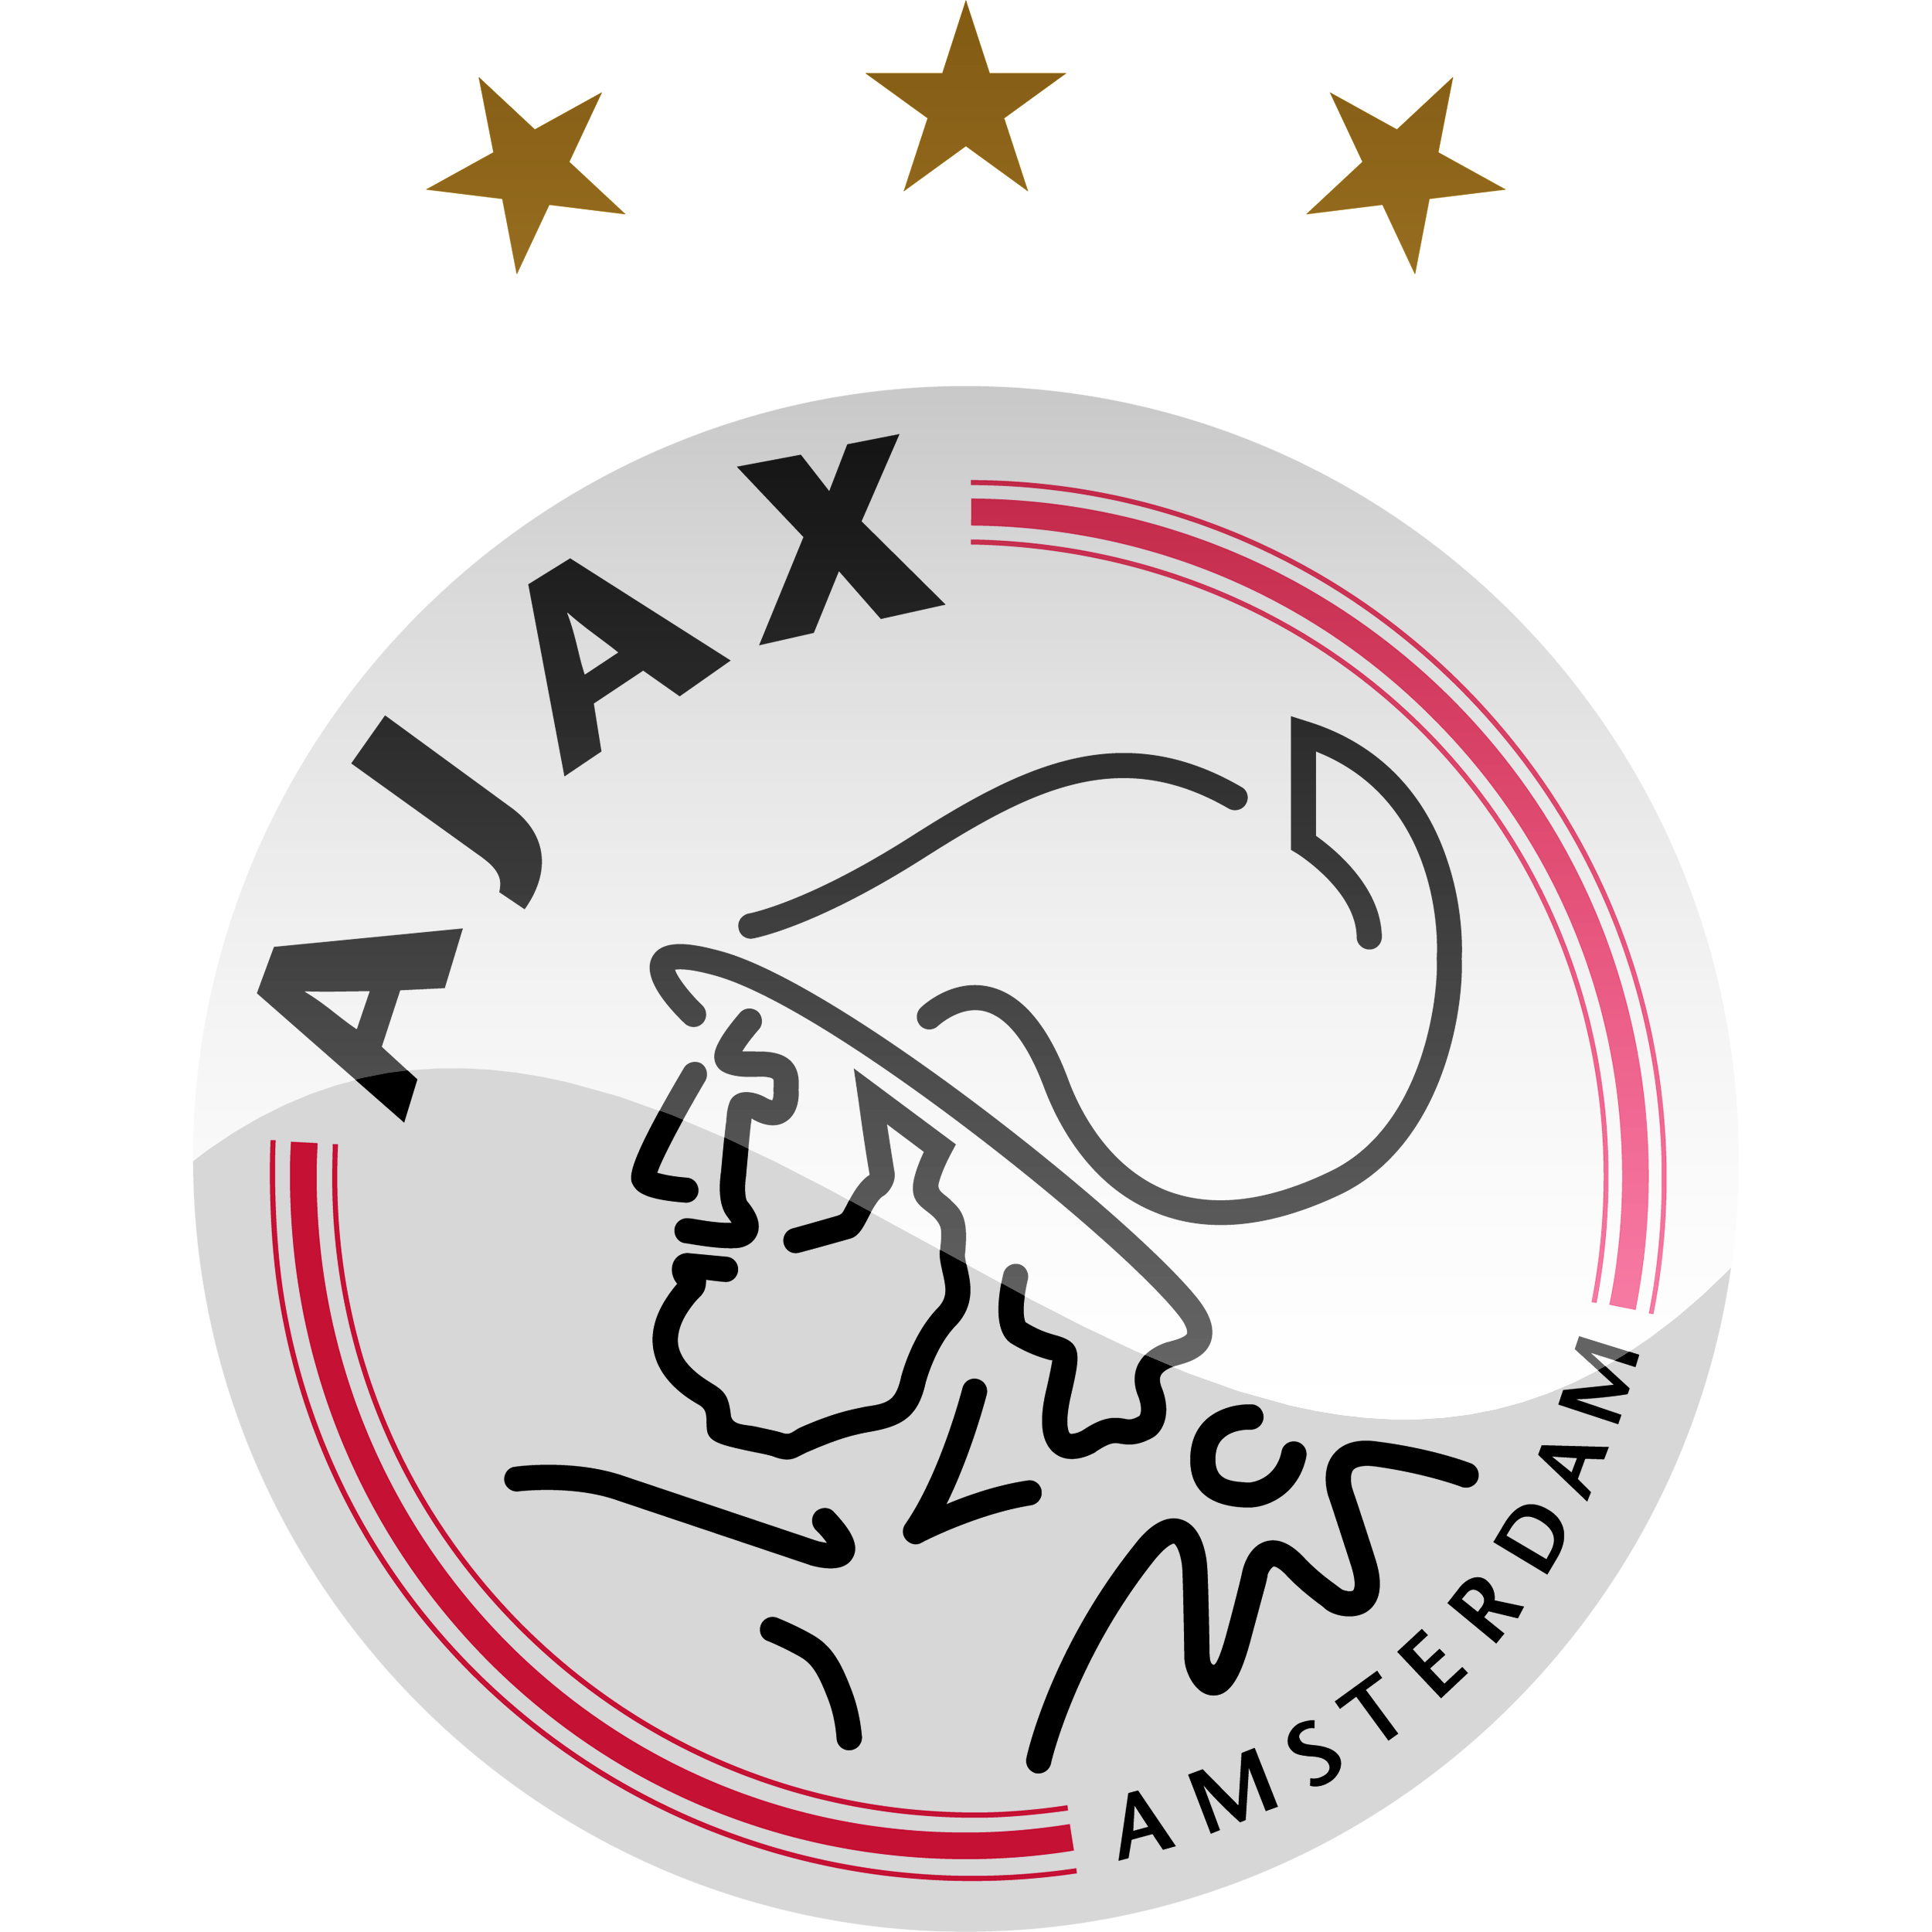 Ajax History, Ownership, Squad Members, Support Staff, And Honors -